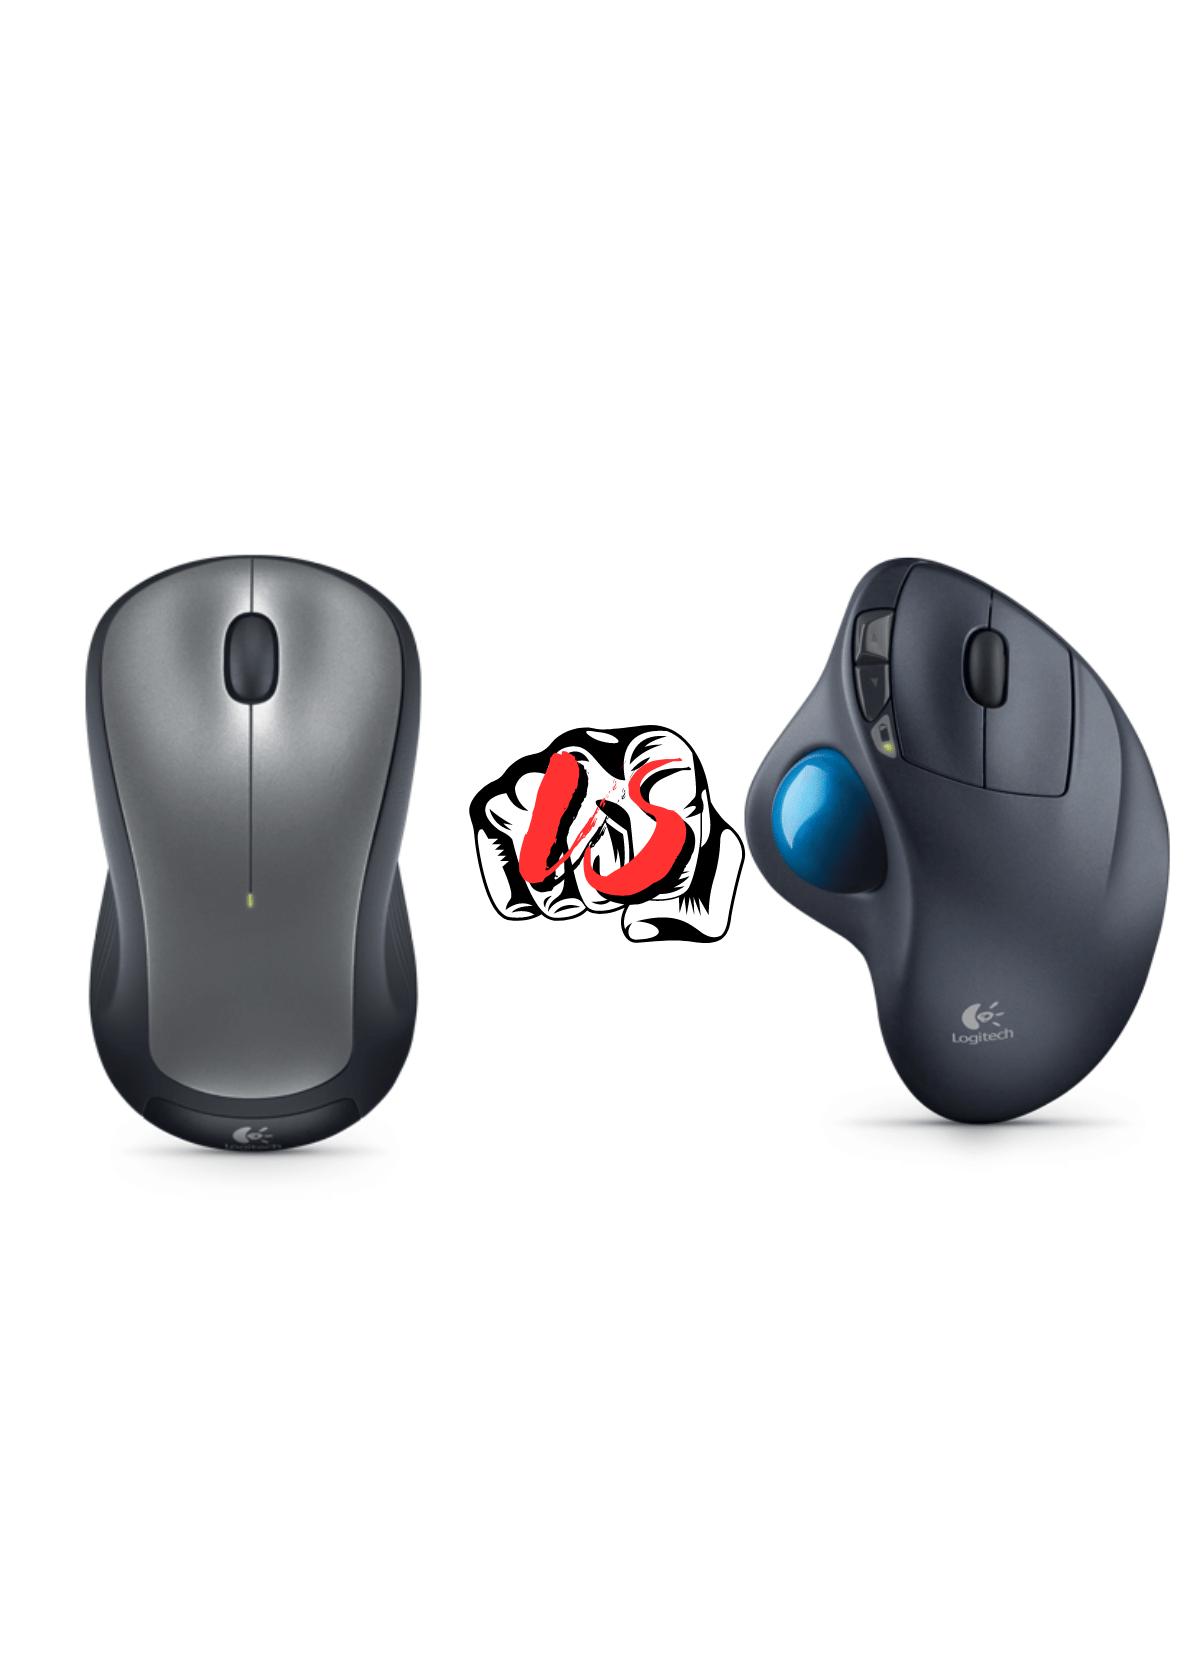 Trackball vs Normal Mouse: What's the Difference?